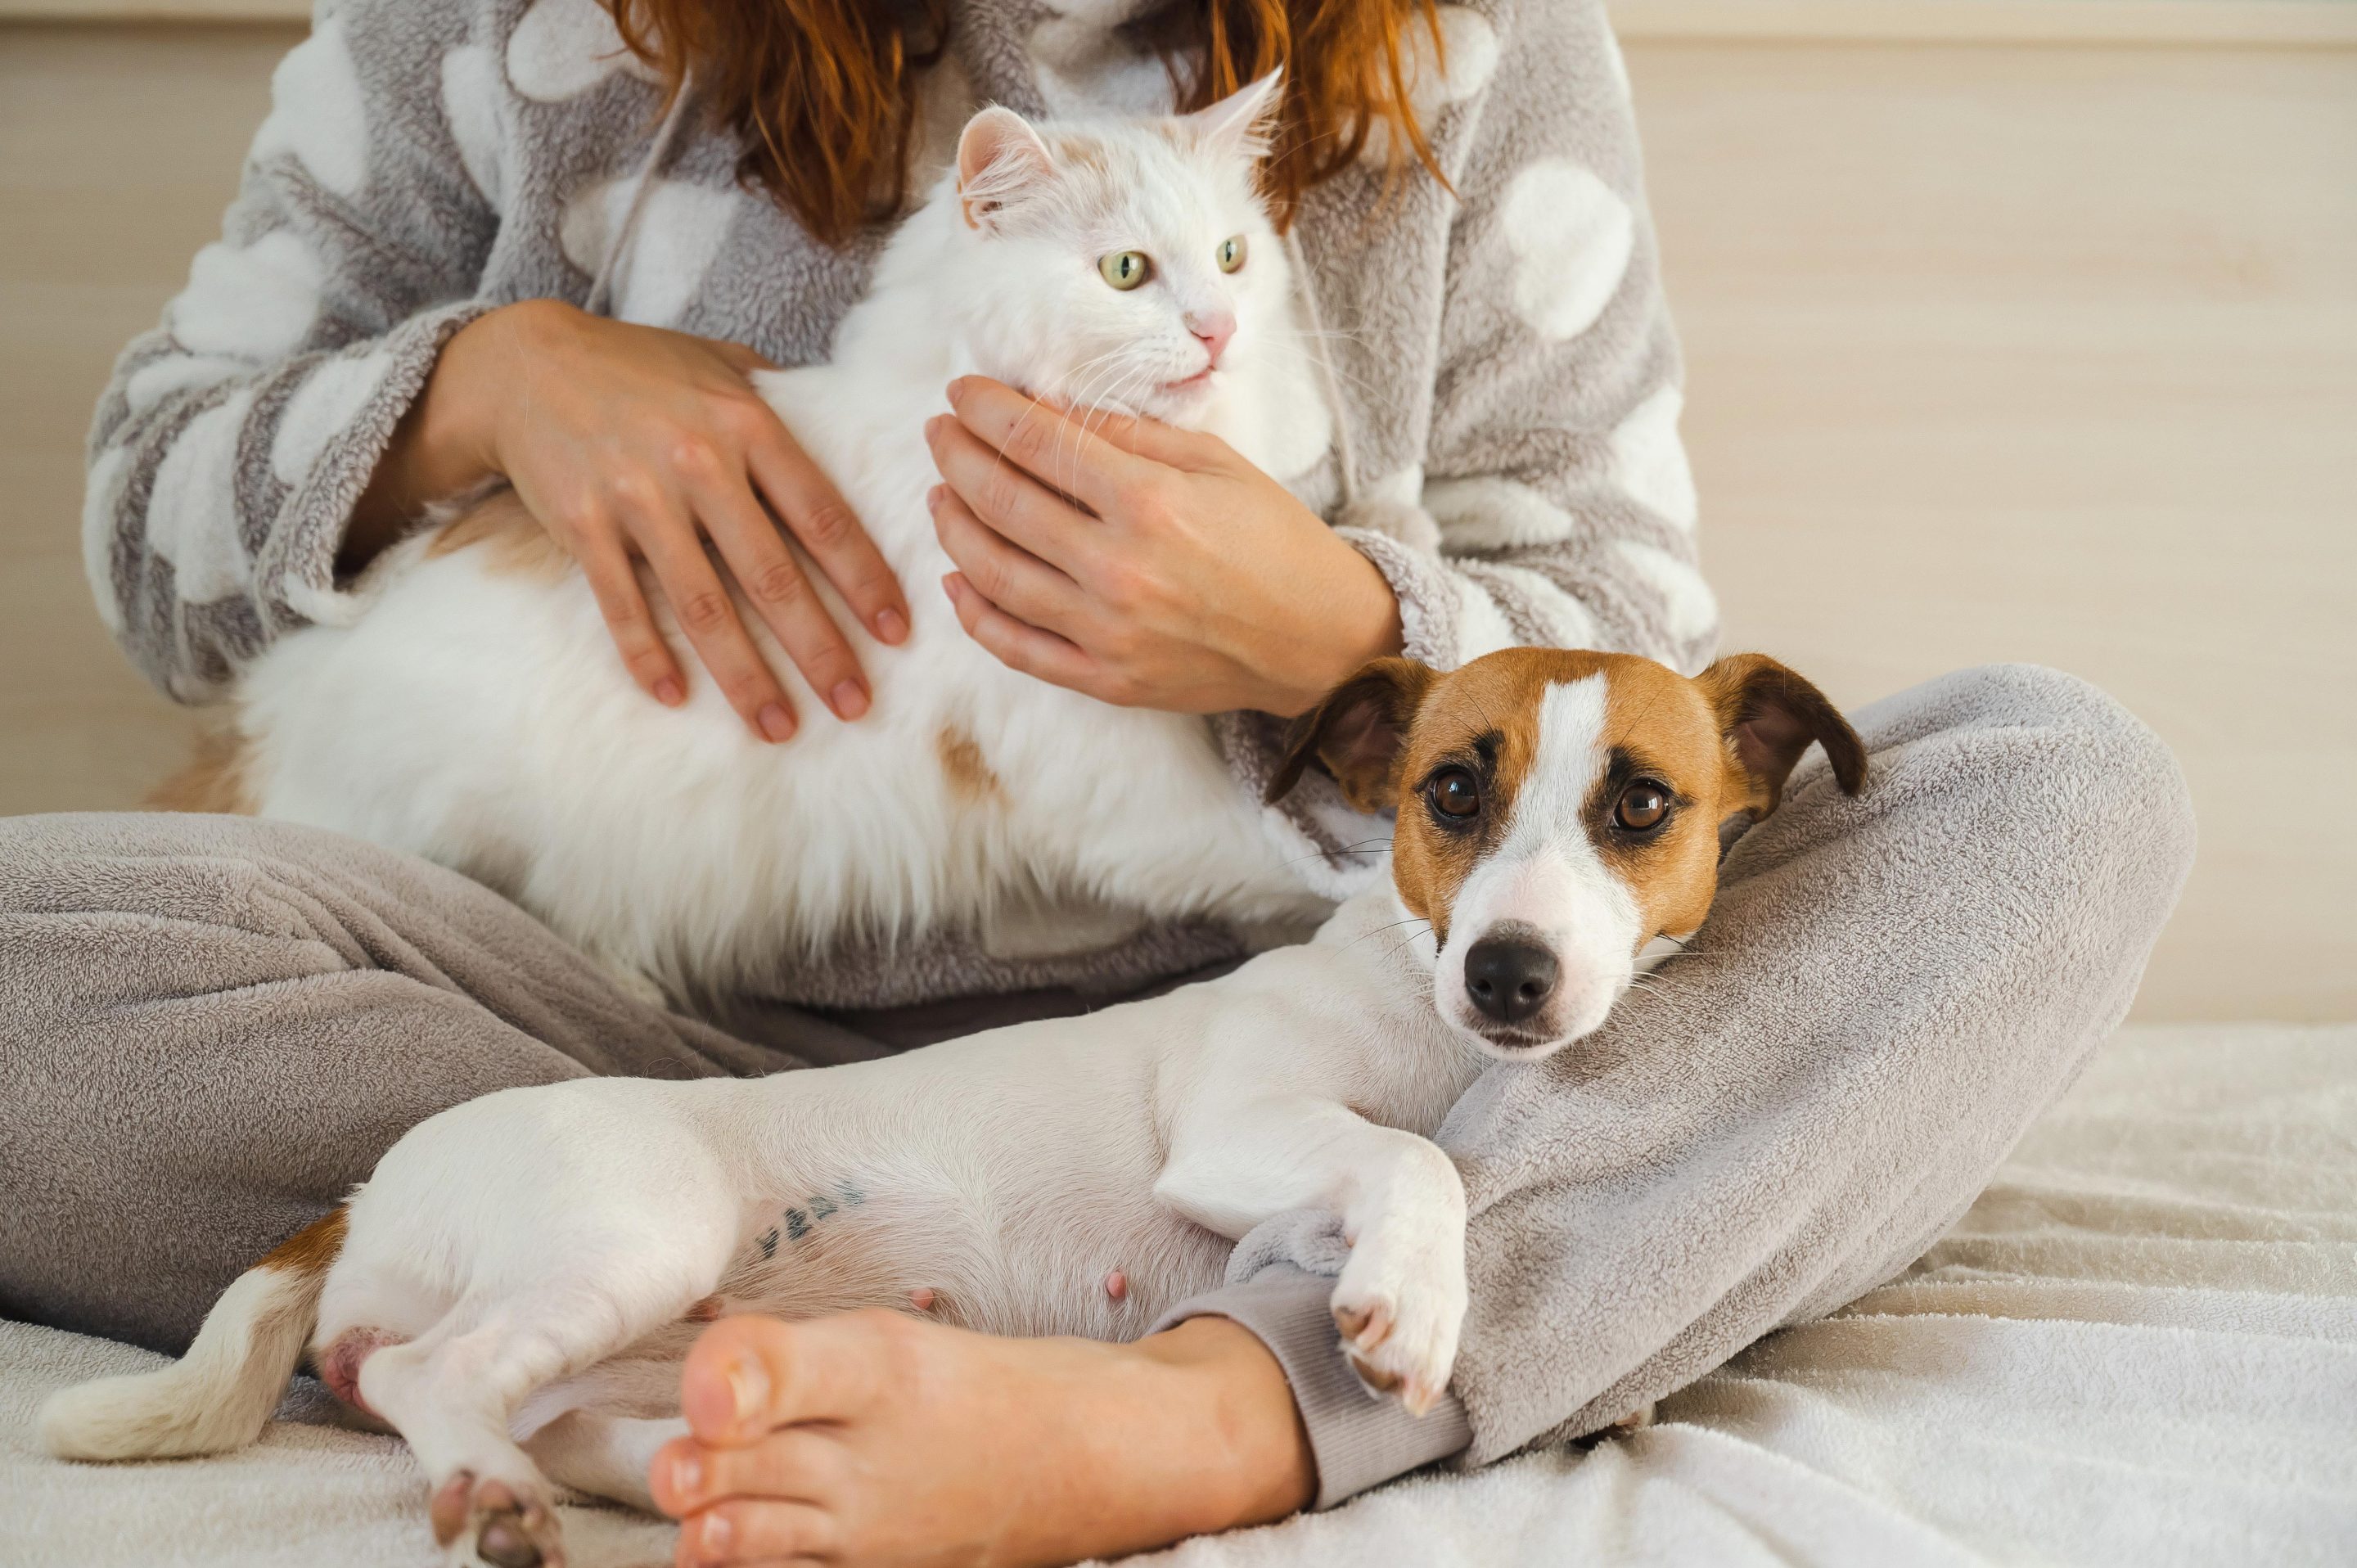 Lady with a white dog and a white cat in her lap